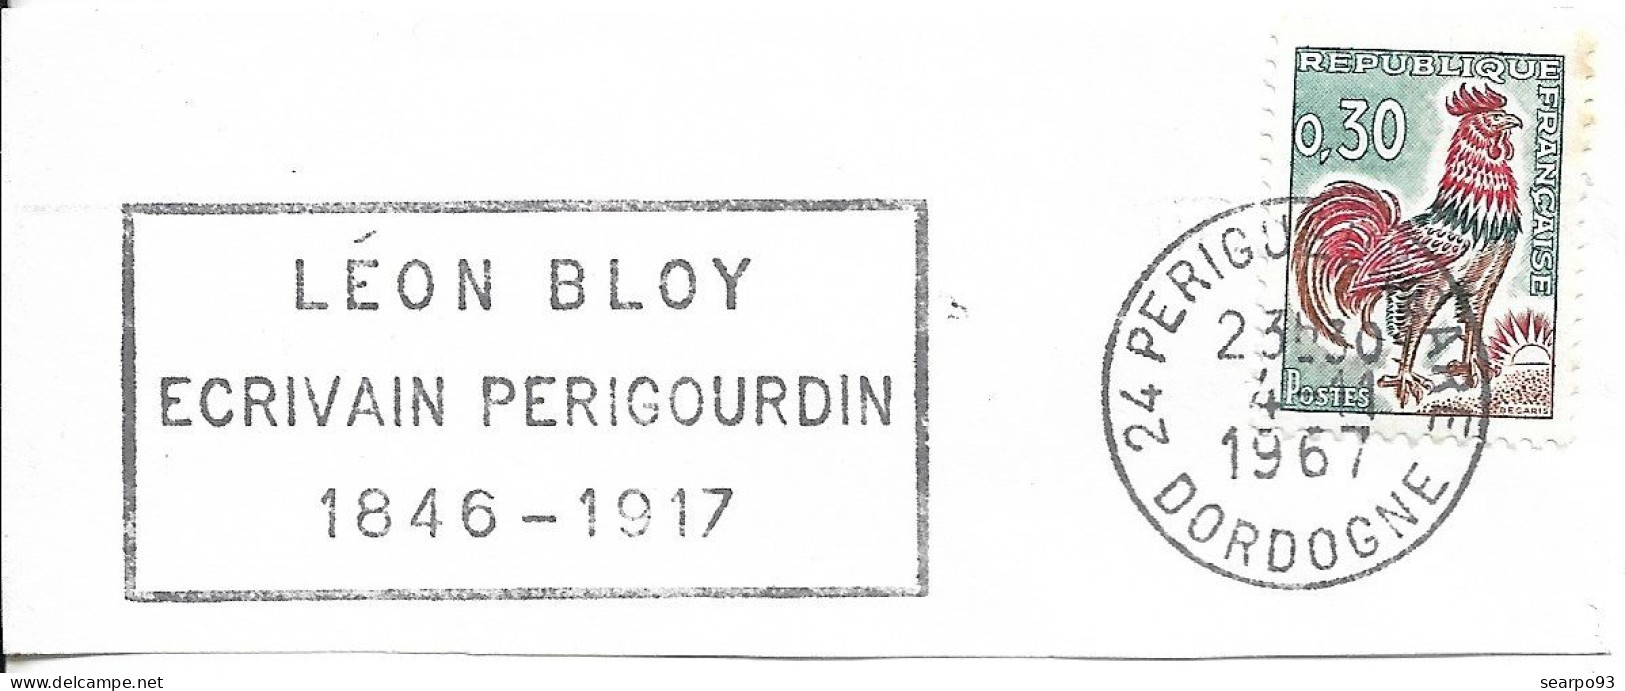 FRANCE. POSTMARK. WRITER LEON BLOY. PERIGUEUX. 1967 - 1961-....